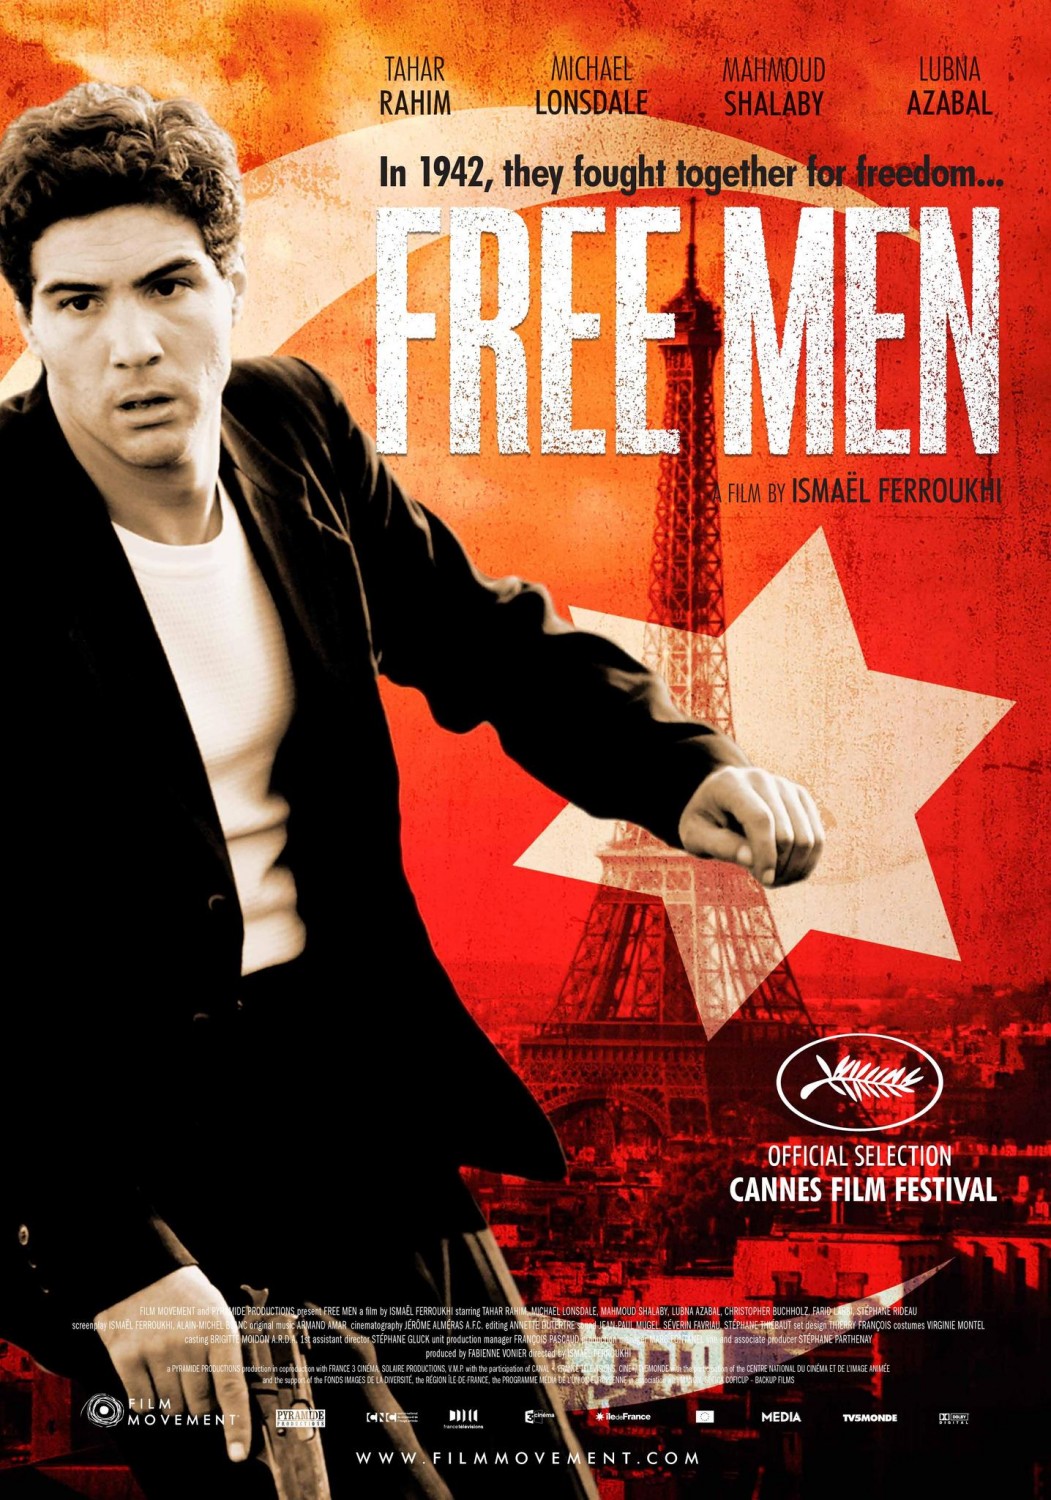 Extra Large Movie Poster Image for Les hommes libres (#1 of 2)